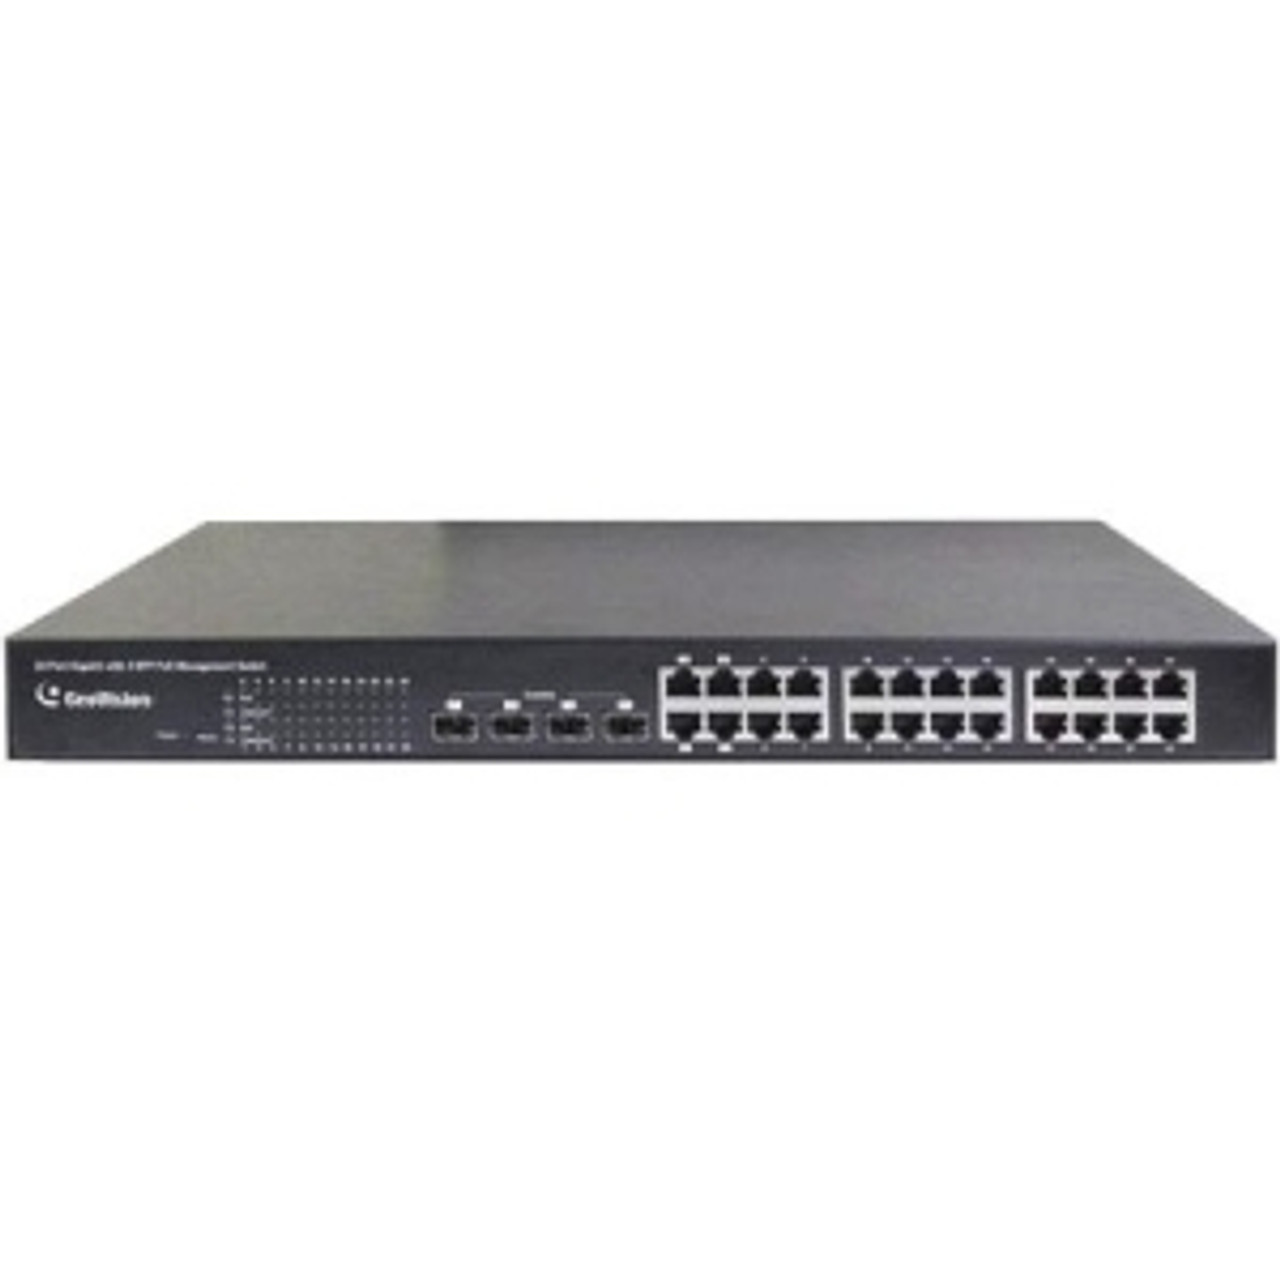 GV-POE2411 GeoVision 24-Port Gigabit 802.3at Web Management PoE Switch Manageable 2 Layer Supported Rack-mountable, Under Table (Refurbished)